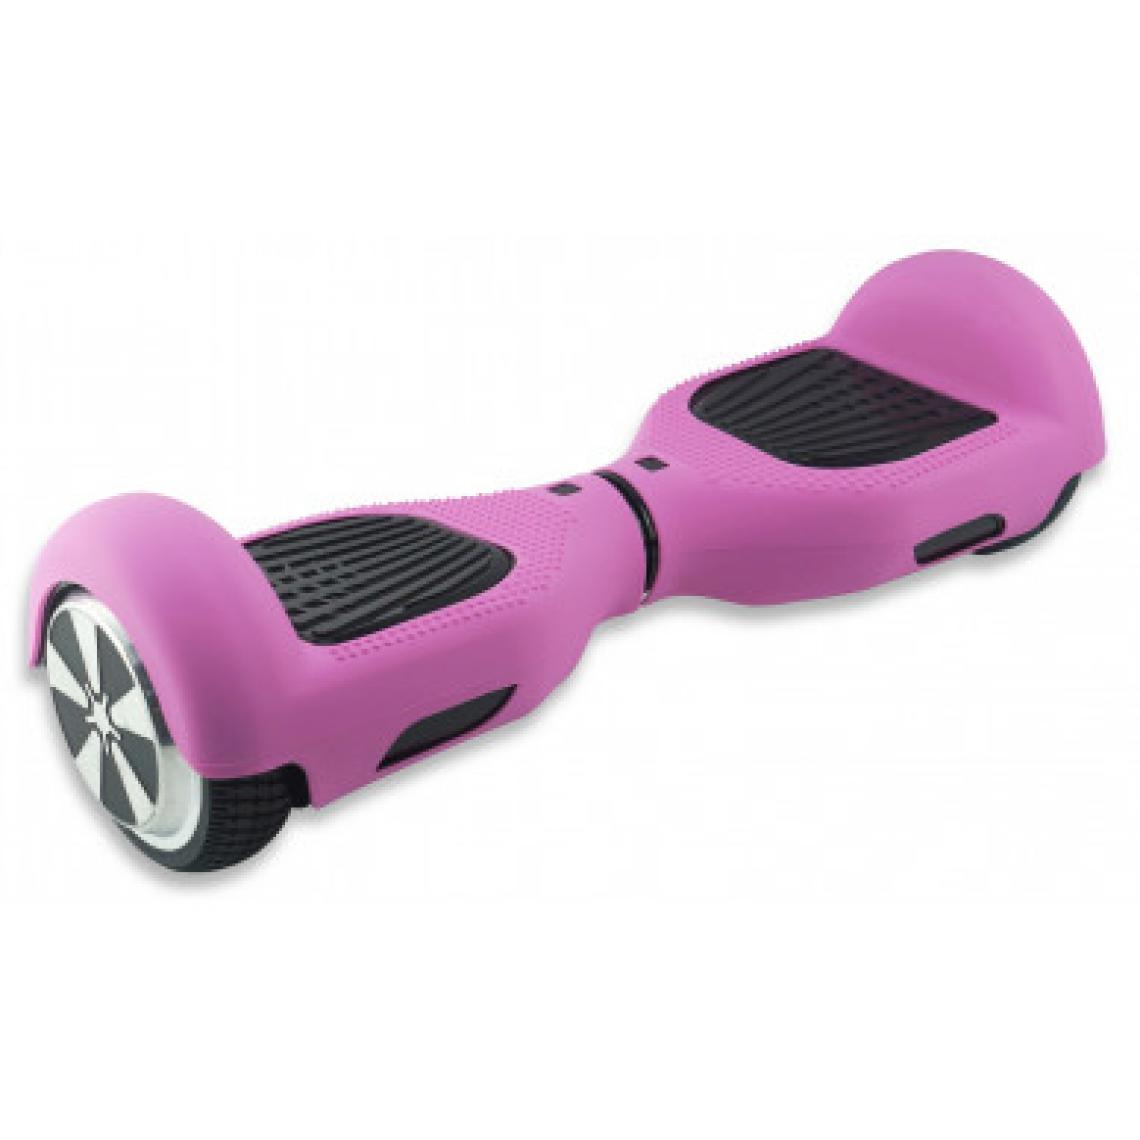 Urbansleeve - Urbansleeve - Protection Pour Hoverboard - Rose - Gyropode